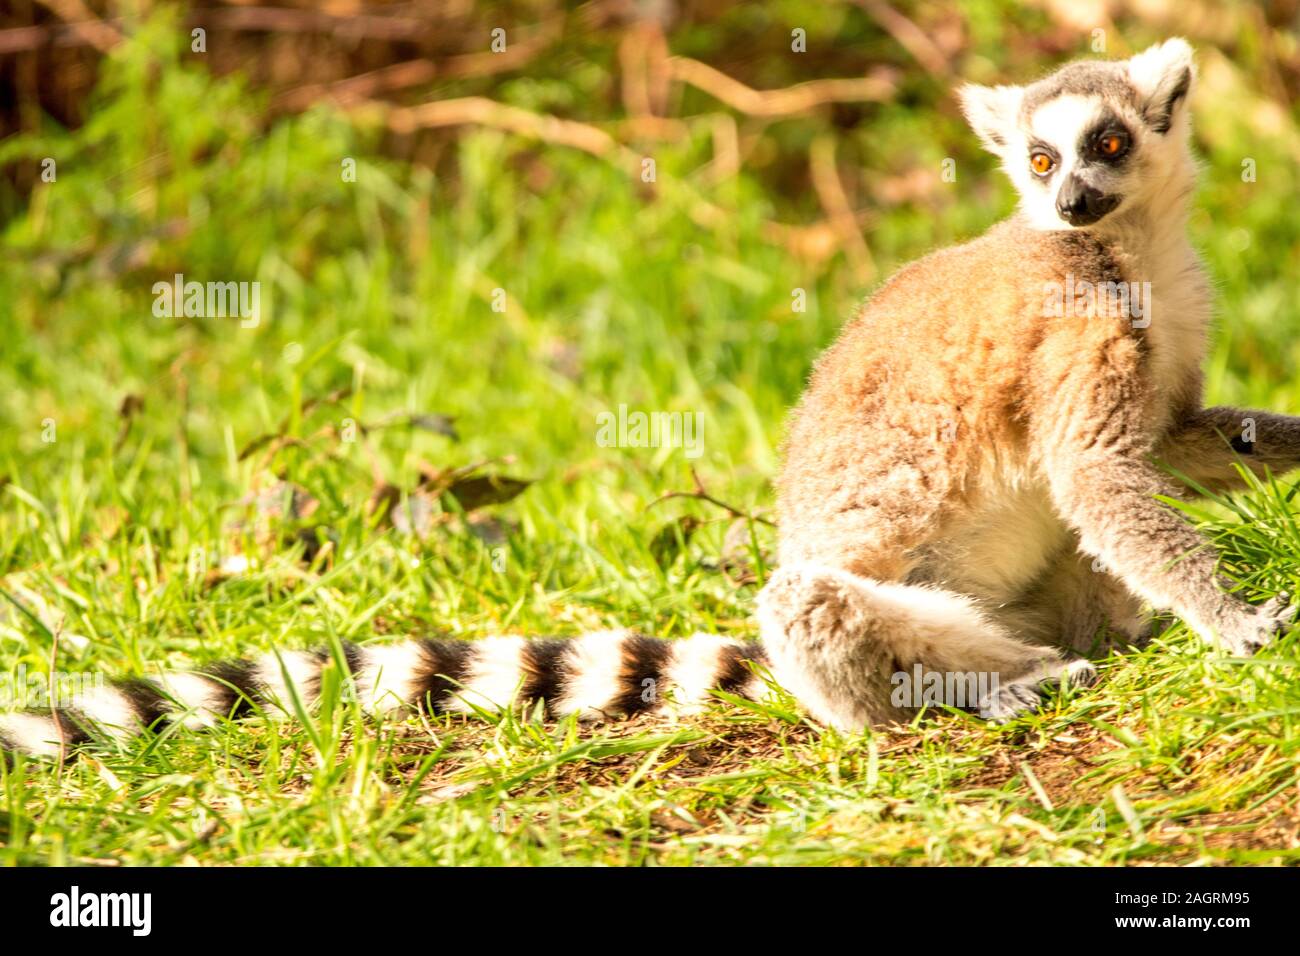 One of the favourite and adorable monkeys around, the Lemur. Stock Photo